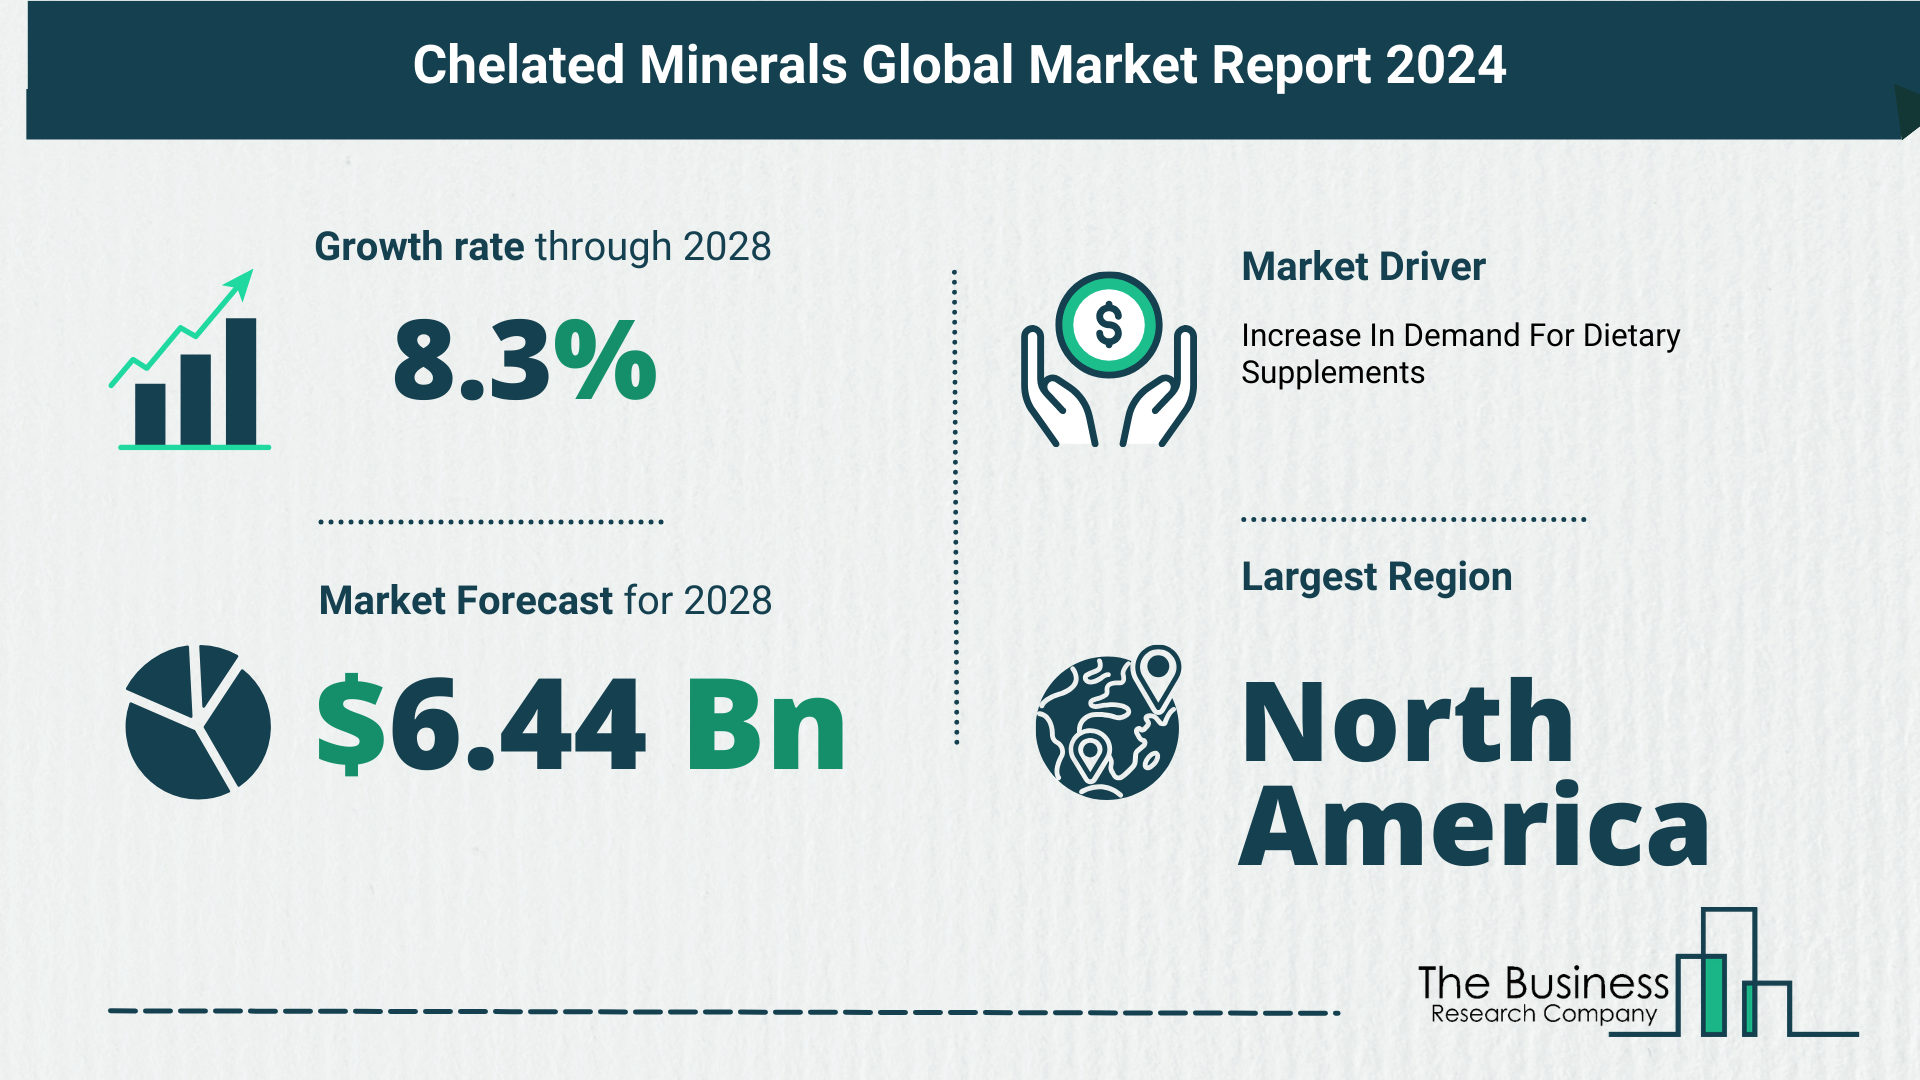 Global Chelated Minerals Market Report 2024 – Top Market Trends And Opportunities